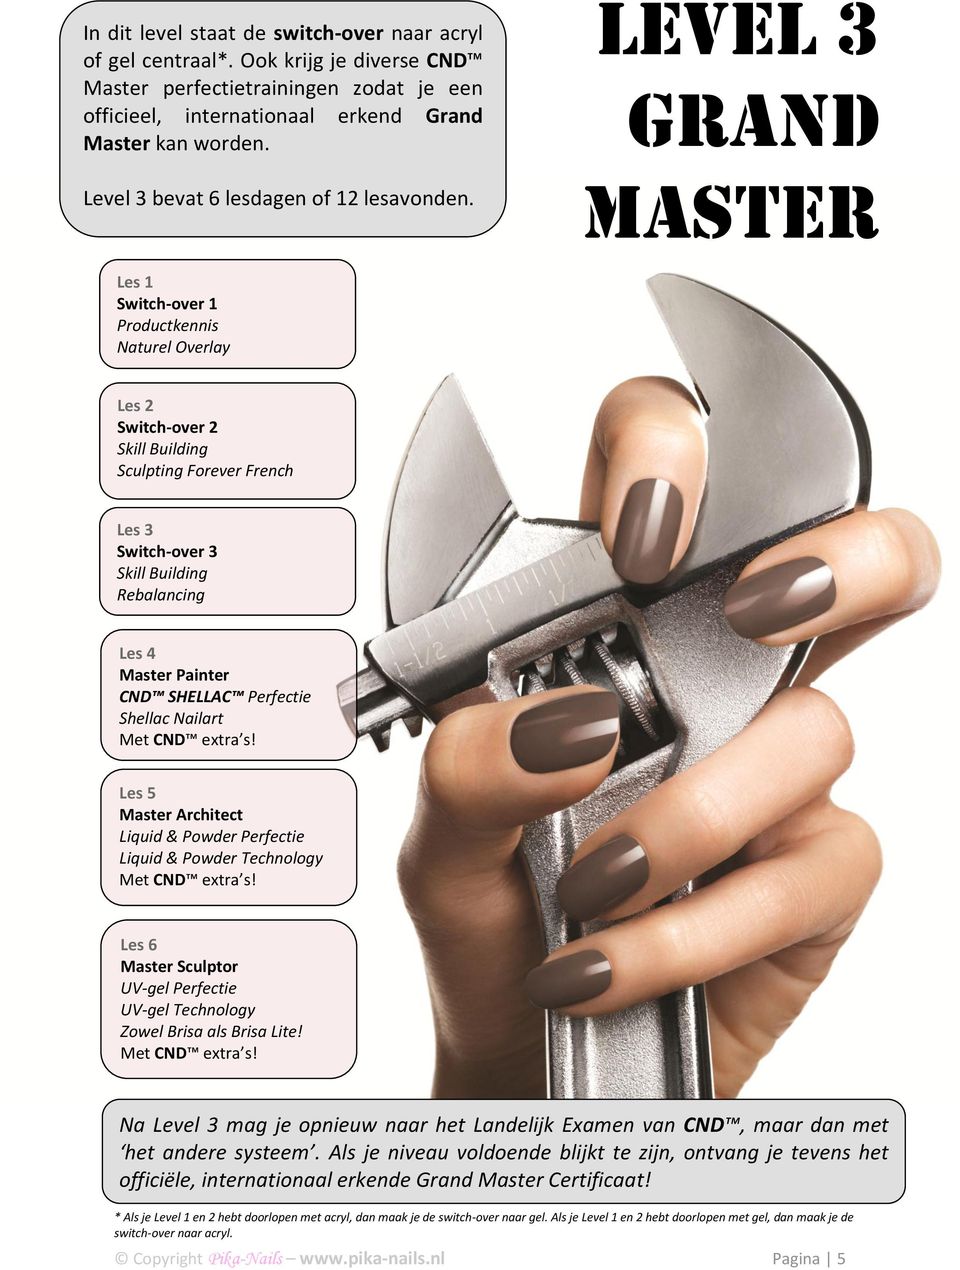 Level 3 Grand Master Les 1 Switch-over 1 Productkennis Naturel Overlay Les 2 Switch-over 2 Skill Building Sculpting Forever French Les 3 Switch-over 3 Skill Building Rebalancing Les 4 Master Painter